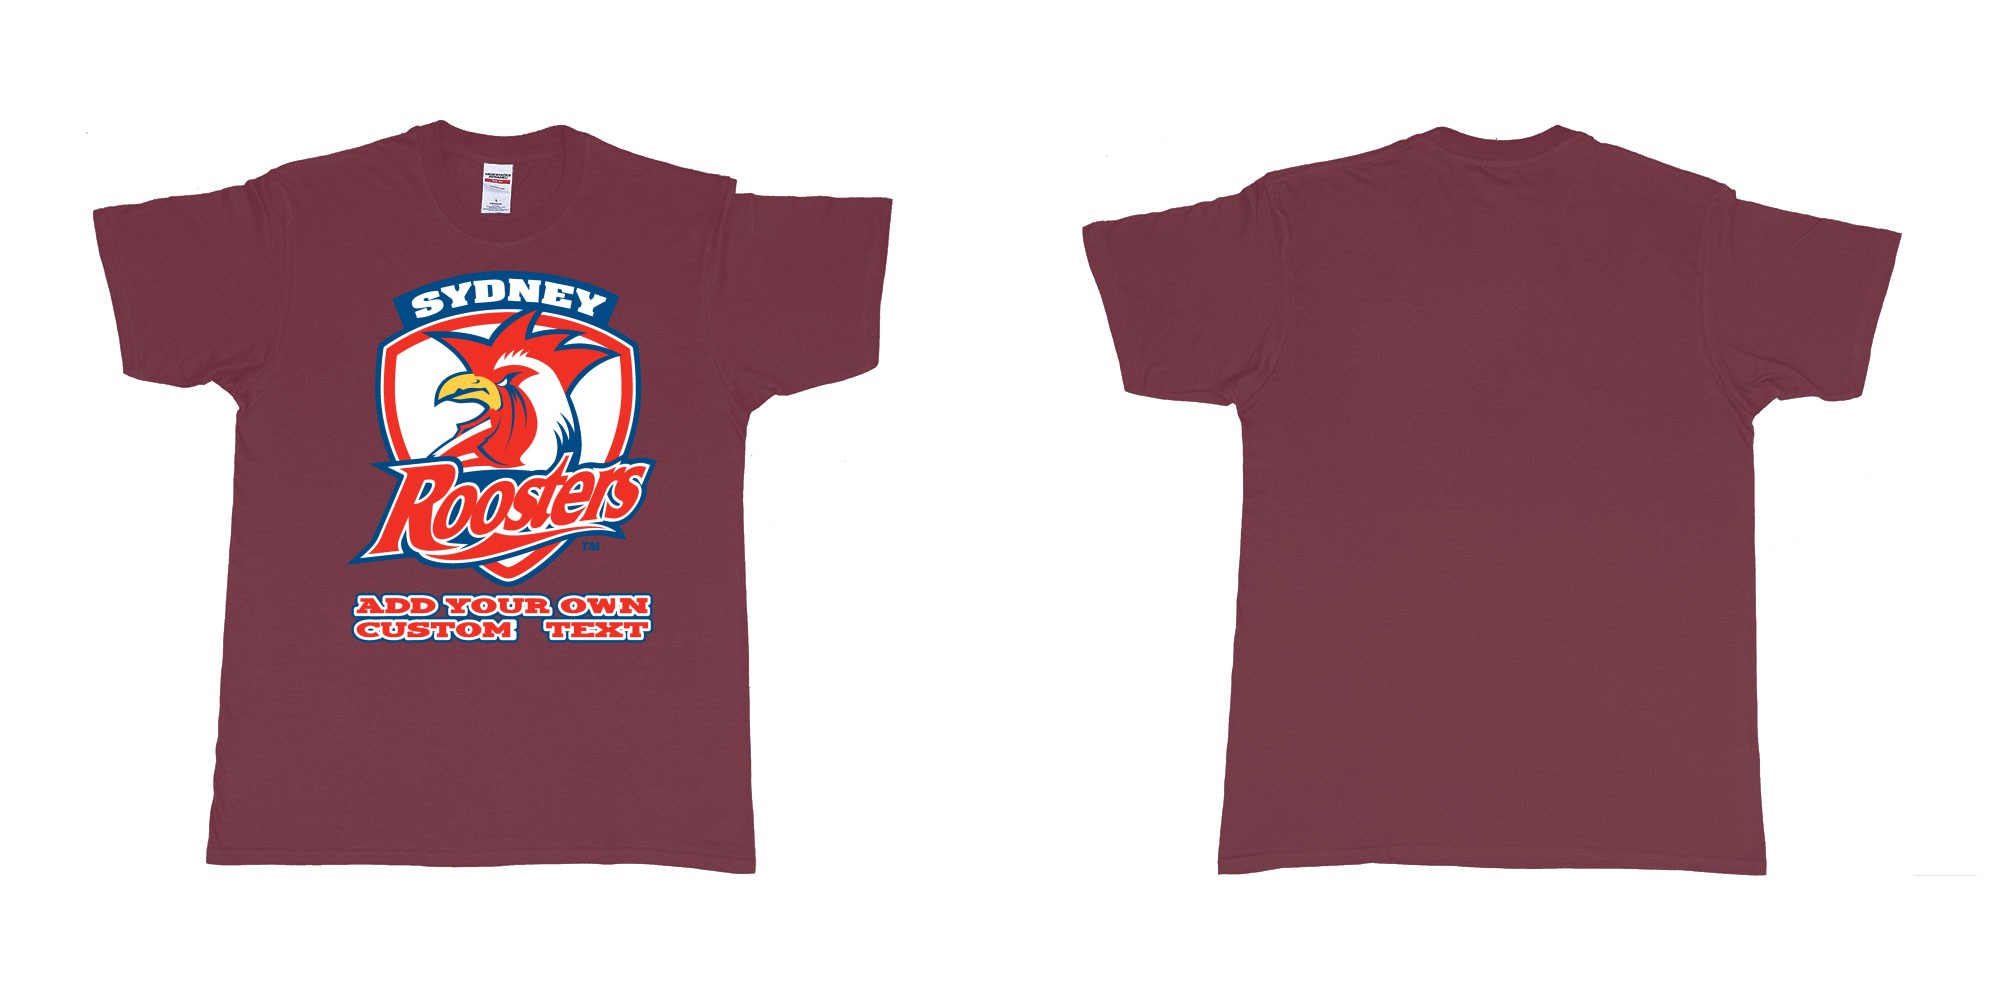 Custom tshirt design sydney roosters custom NRL design in fabric color marron choice your own text made in Bali by The Pirate Way